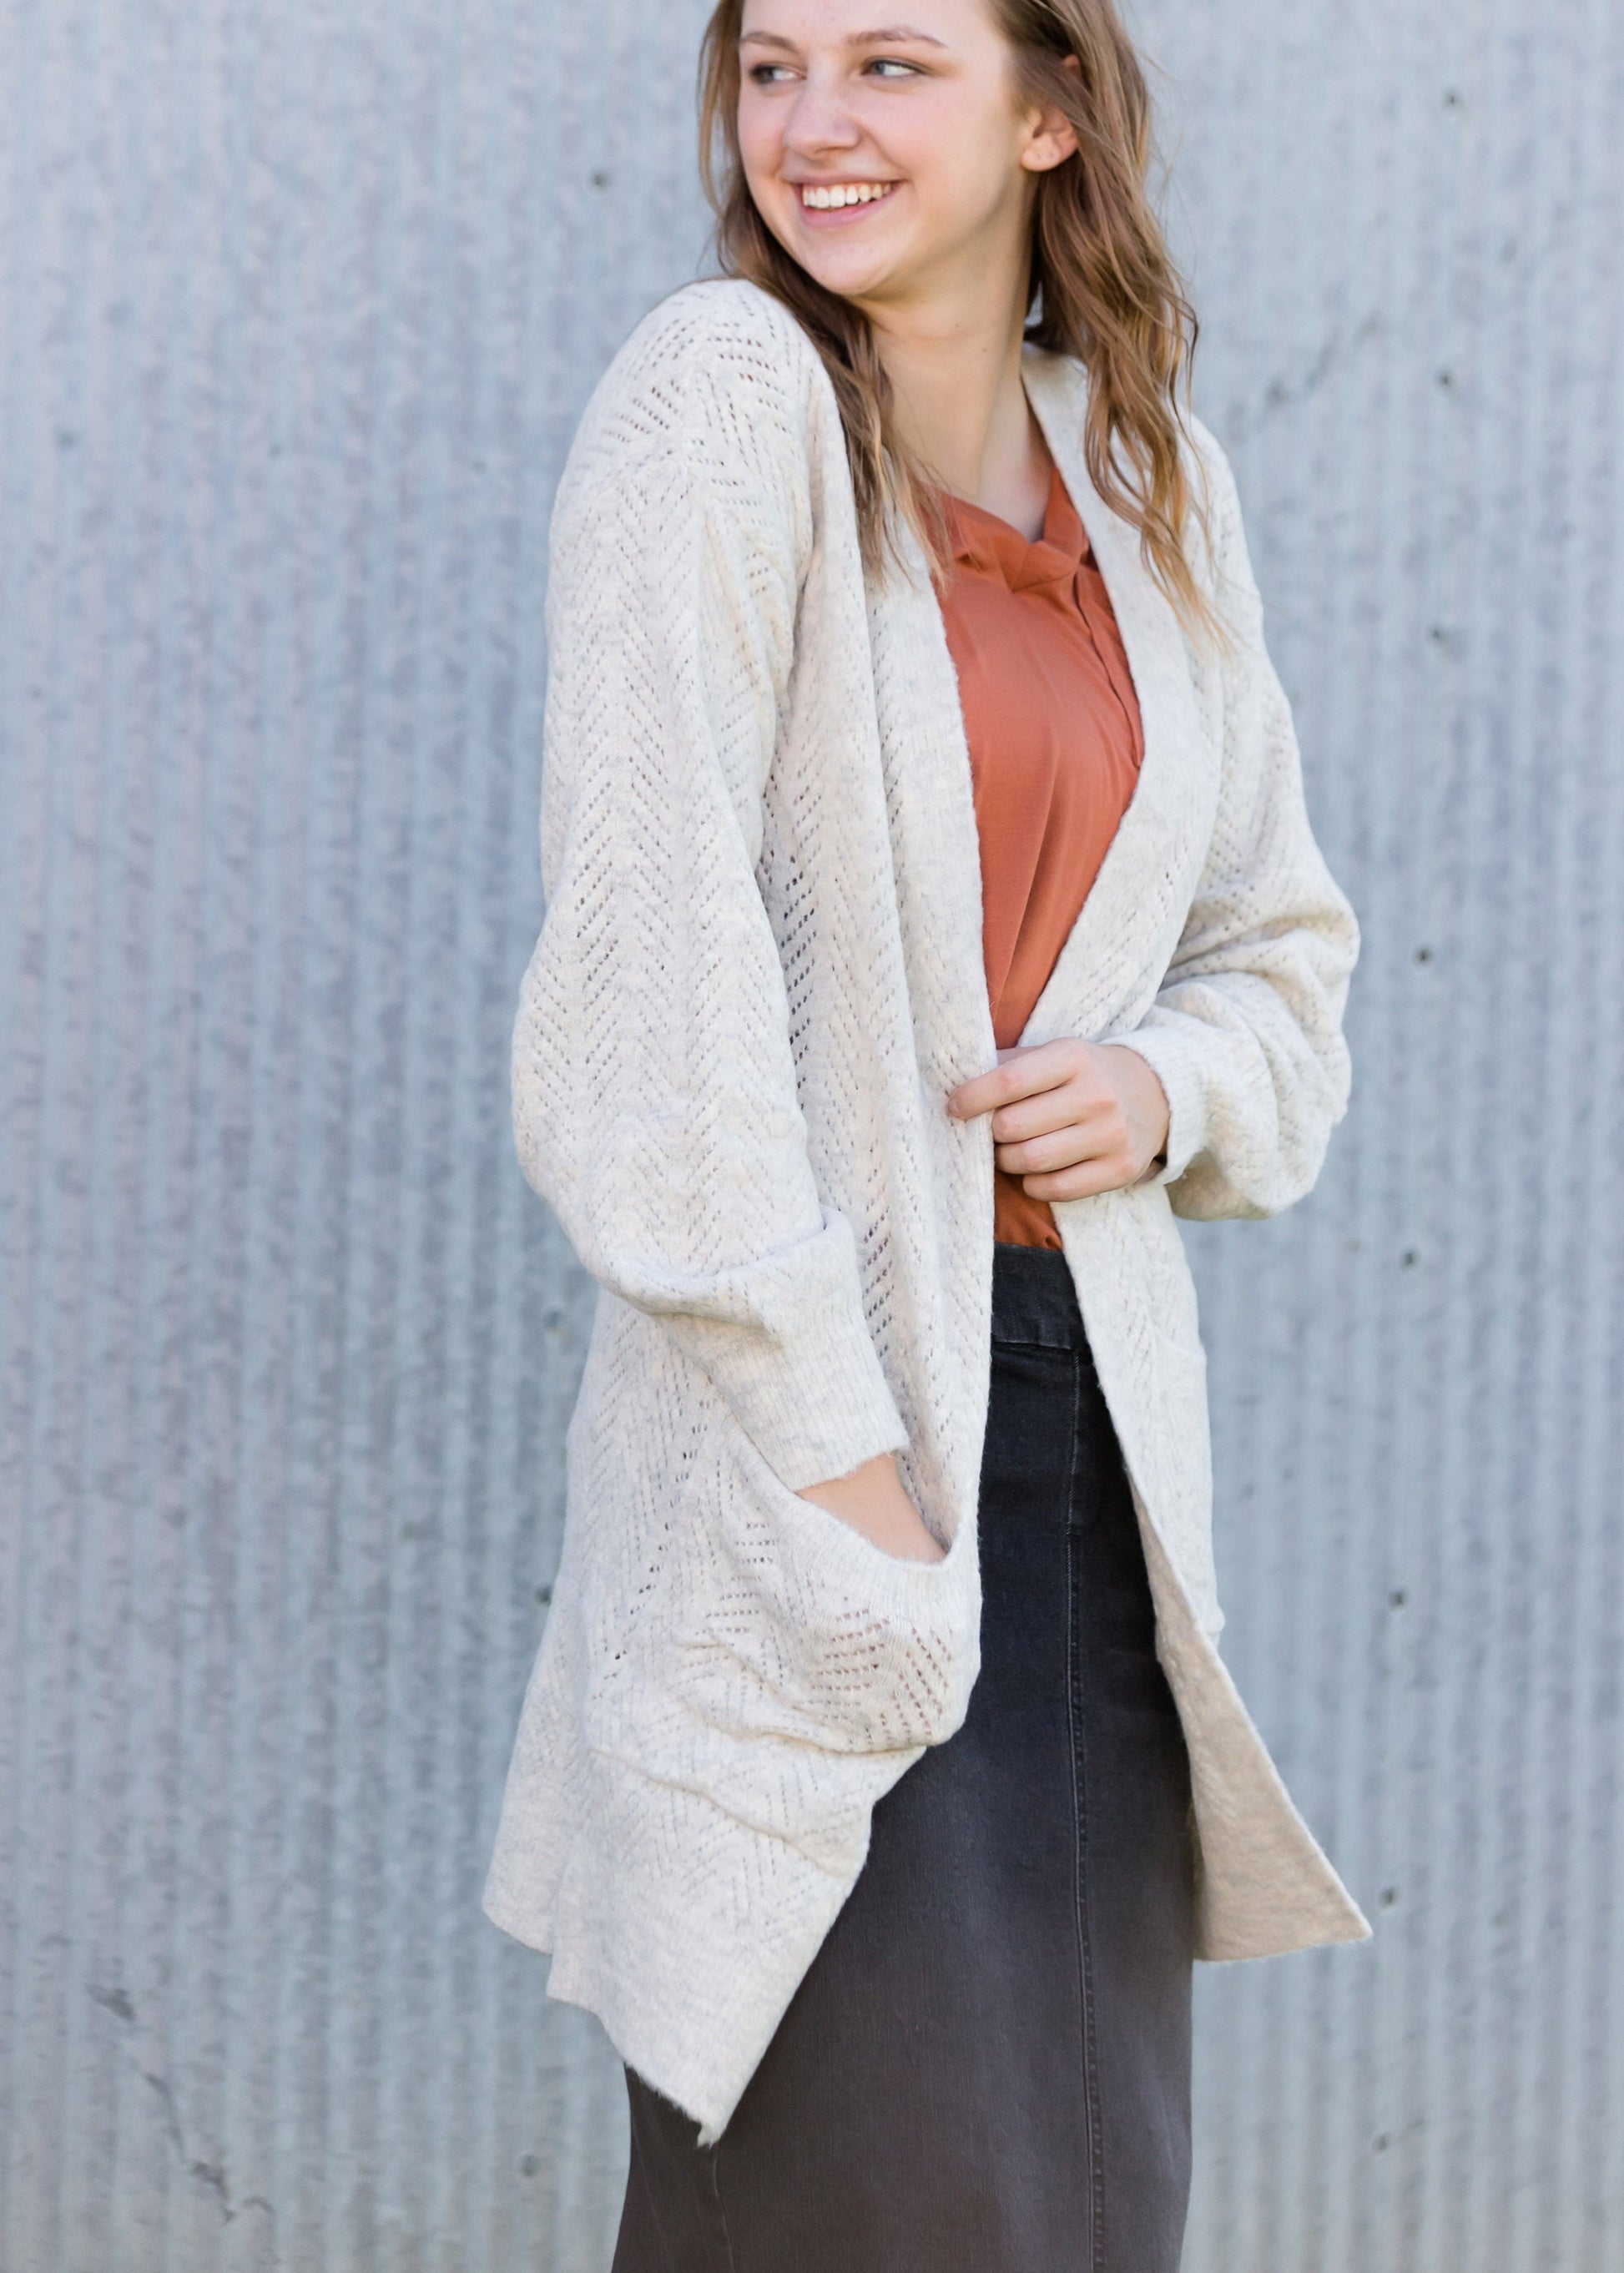 Jacquard Knit Open Front Cardigan - FINAL SALE Layering Essentials